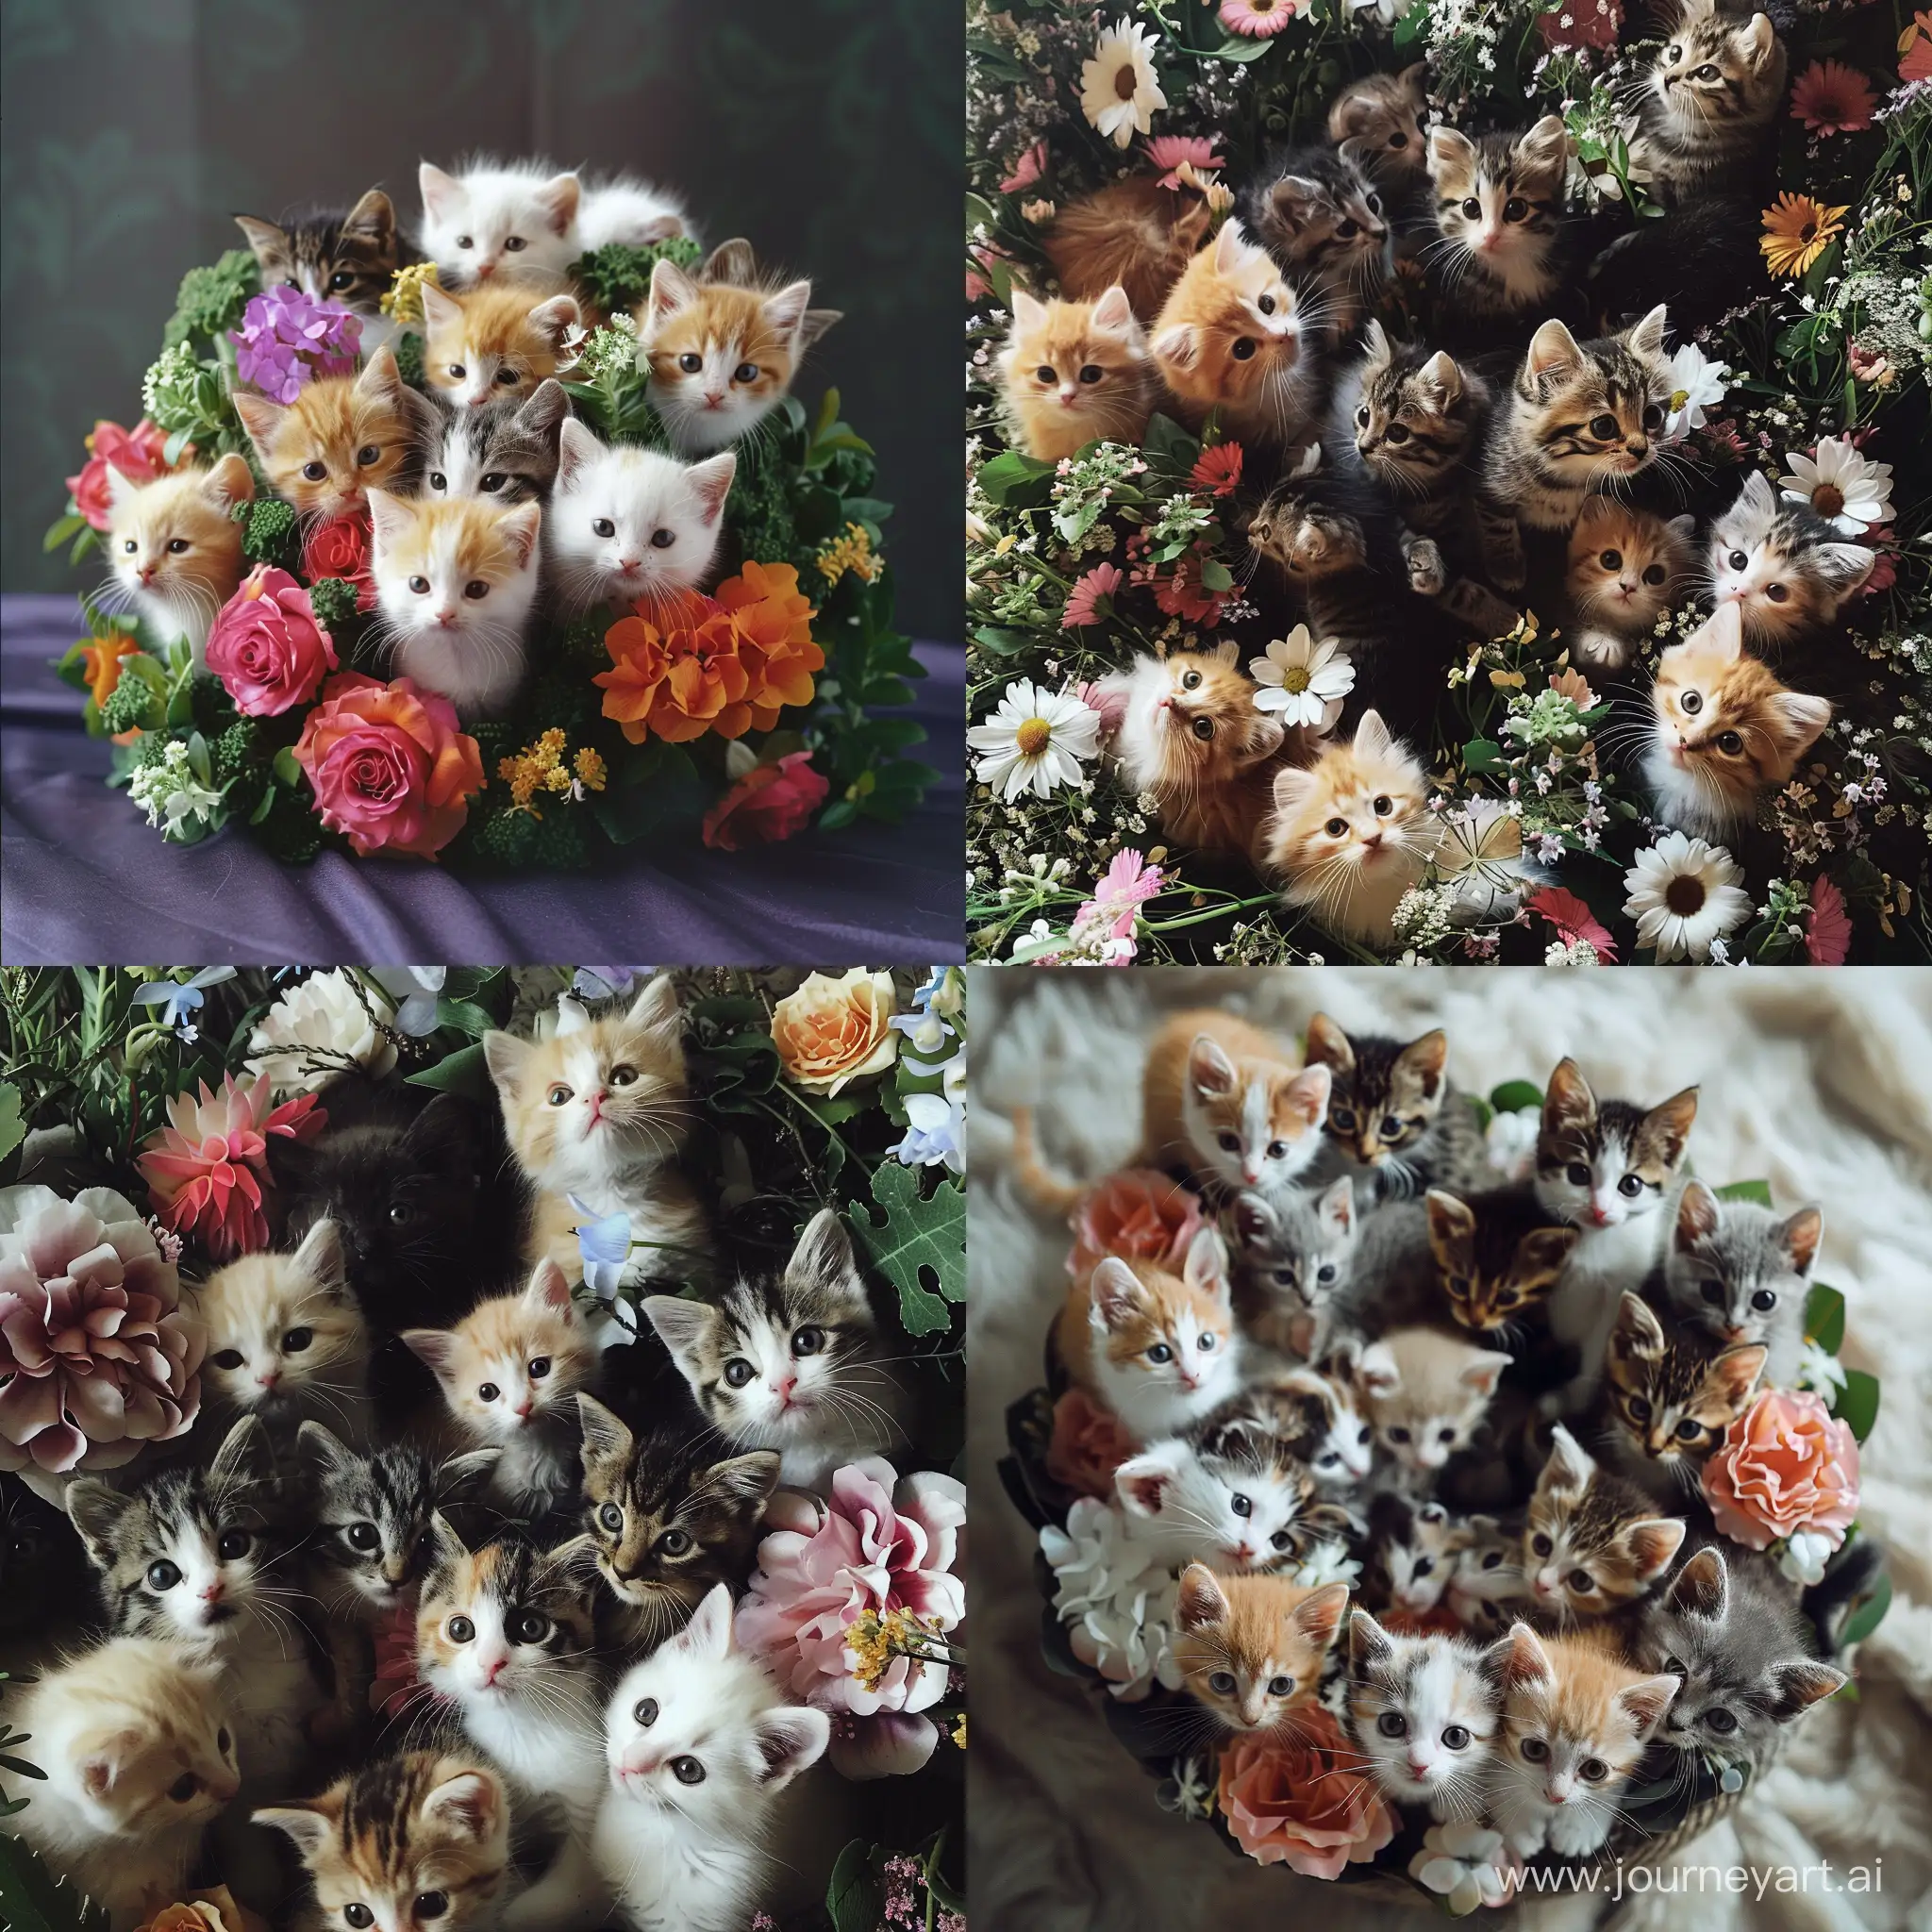 Cute-and-Adorable-Kittens-Bouquet-Playful-Felines-in-a-Floral-Arrangement